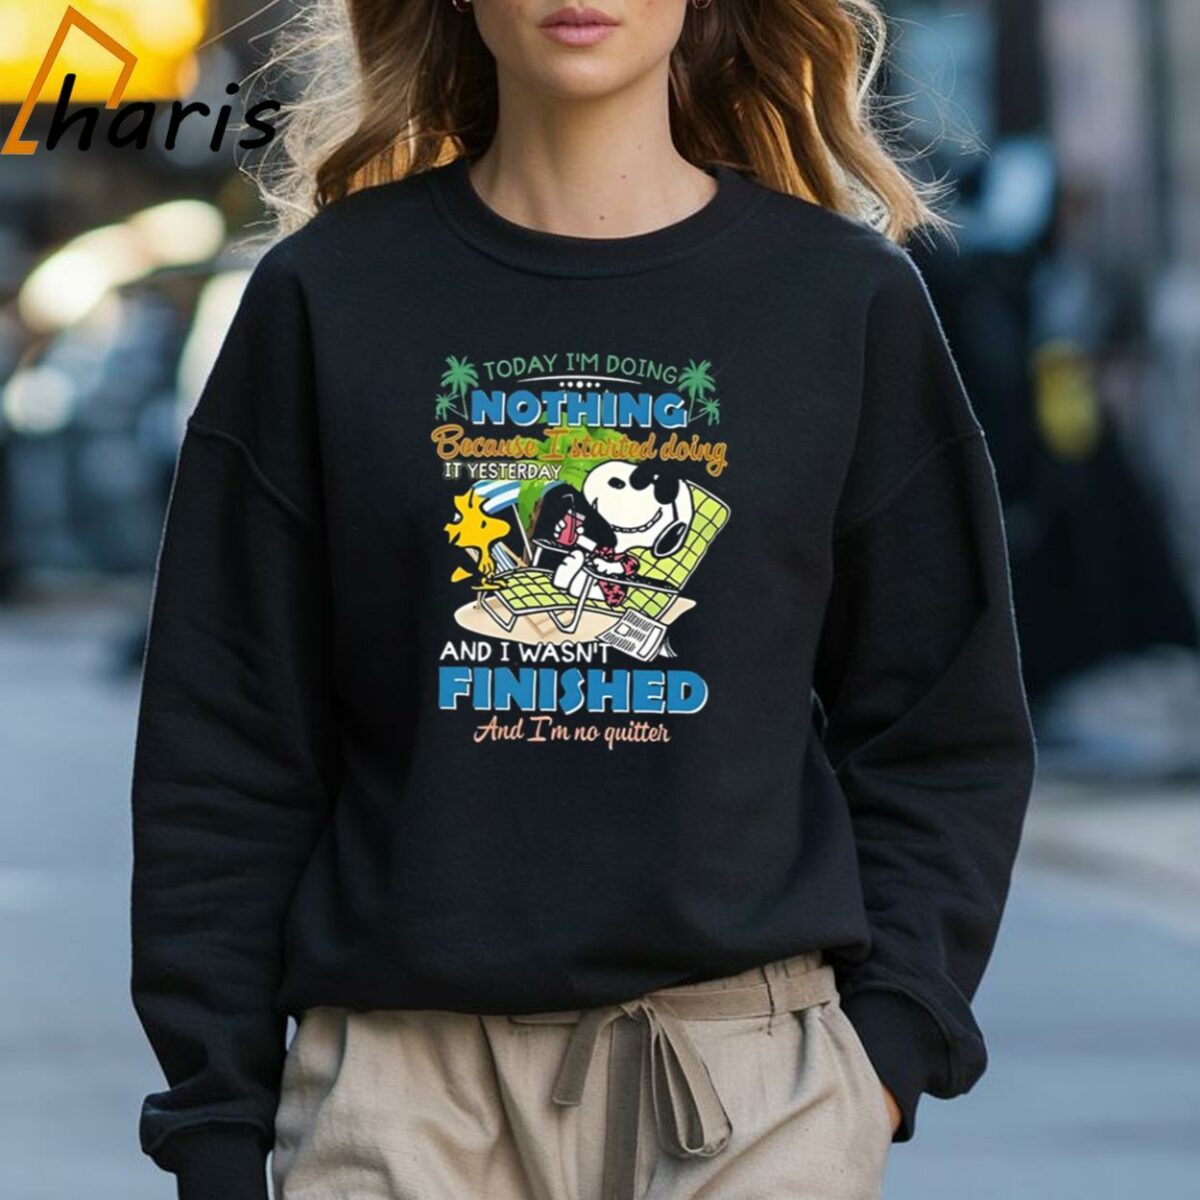 Snoopy Today Im Doing Nothing Because I Started Doing It Yesterday And I Wansnt Finished And Im No Quitter T shirt 3 Sweatshirt